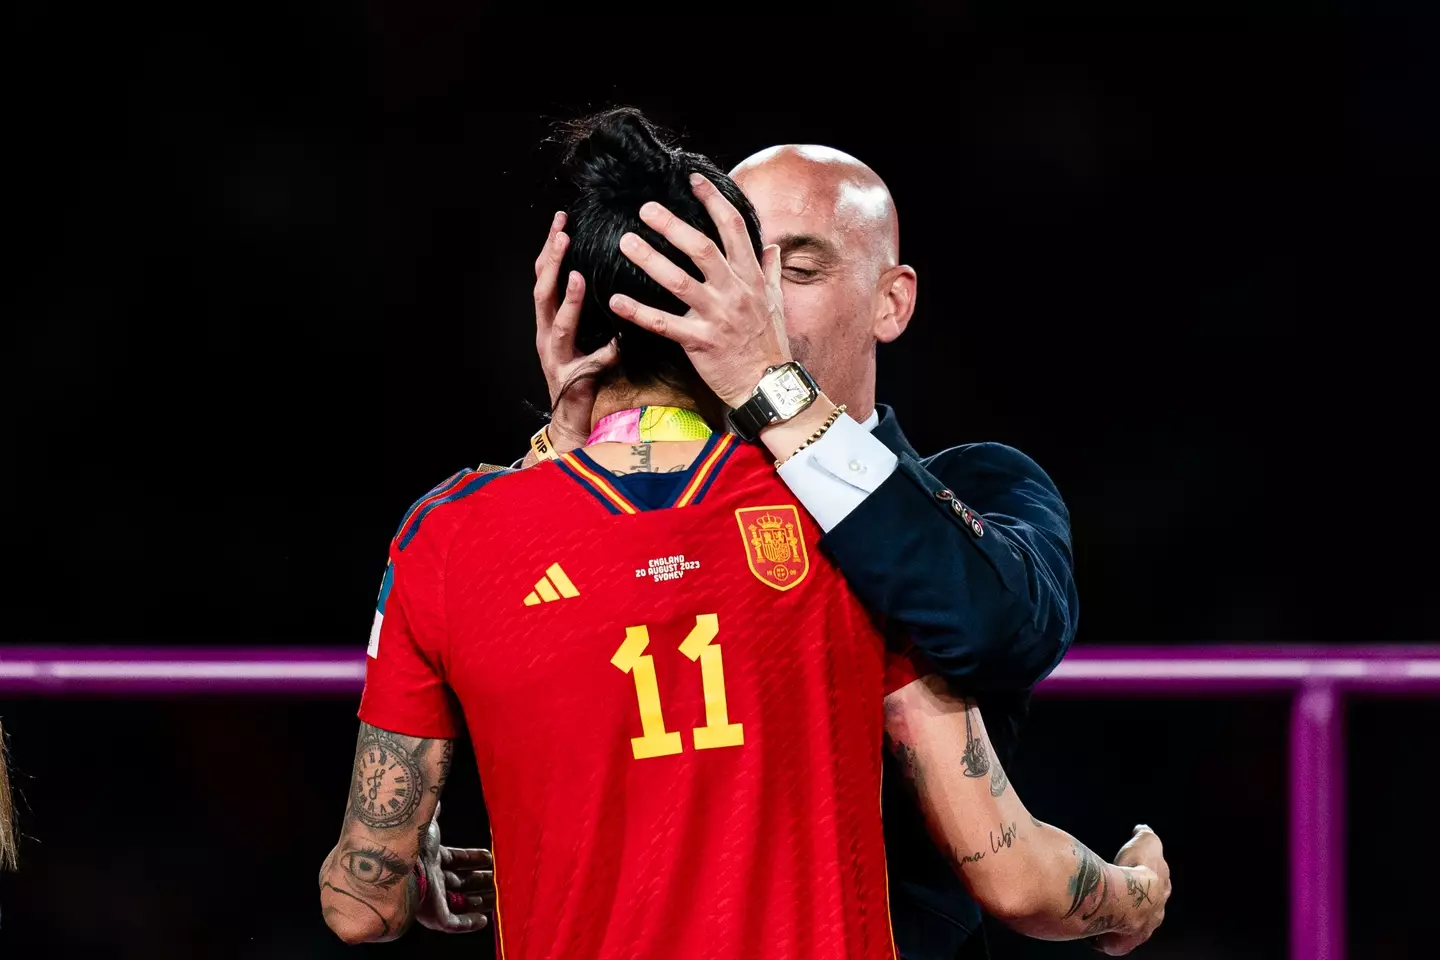 Luis Rubiales has faced widespread backlash for the kiss.